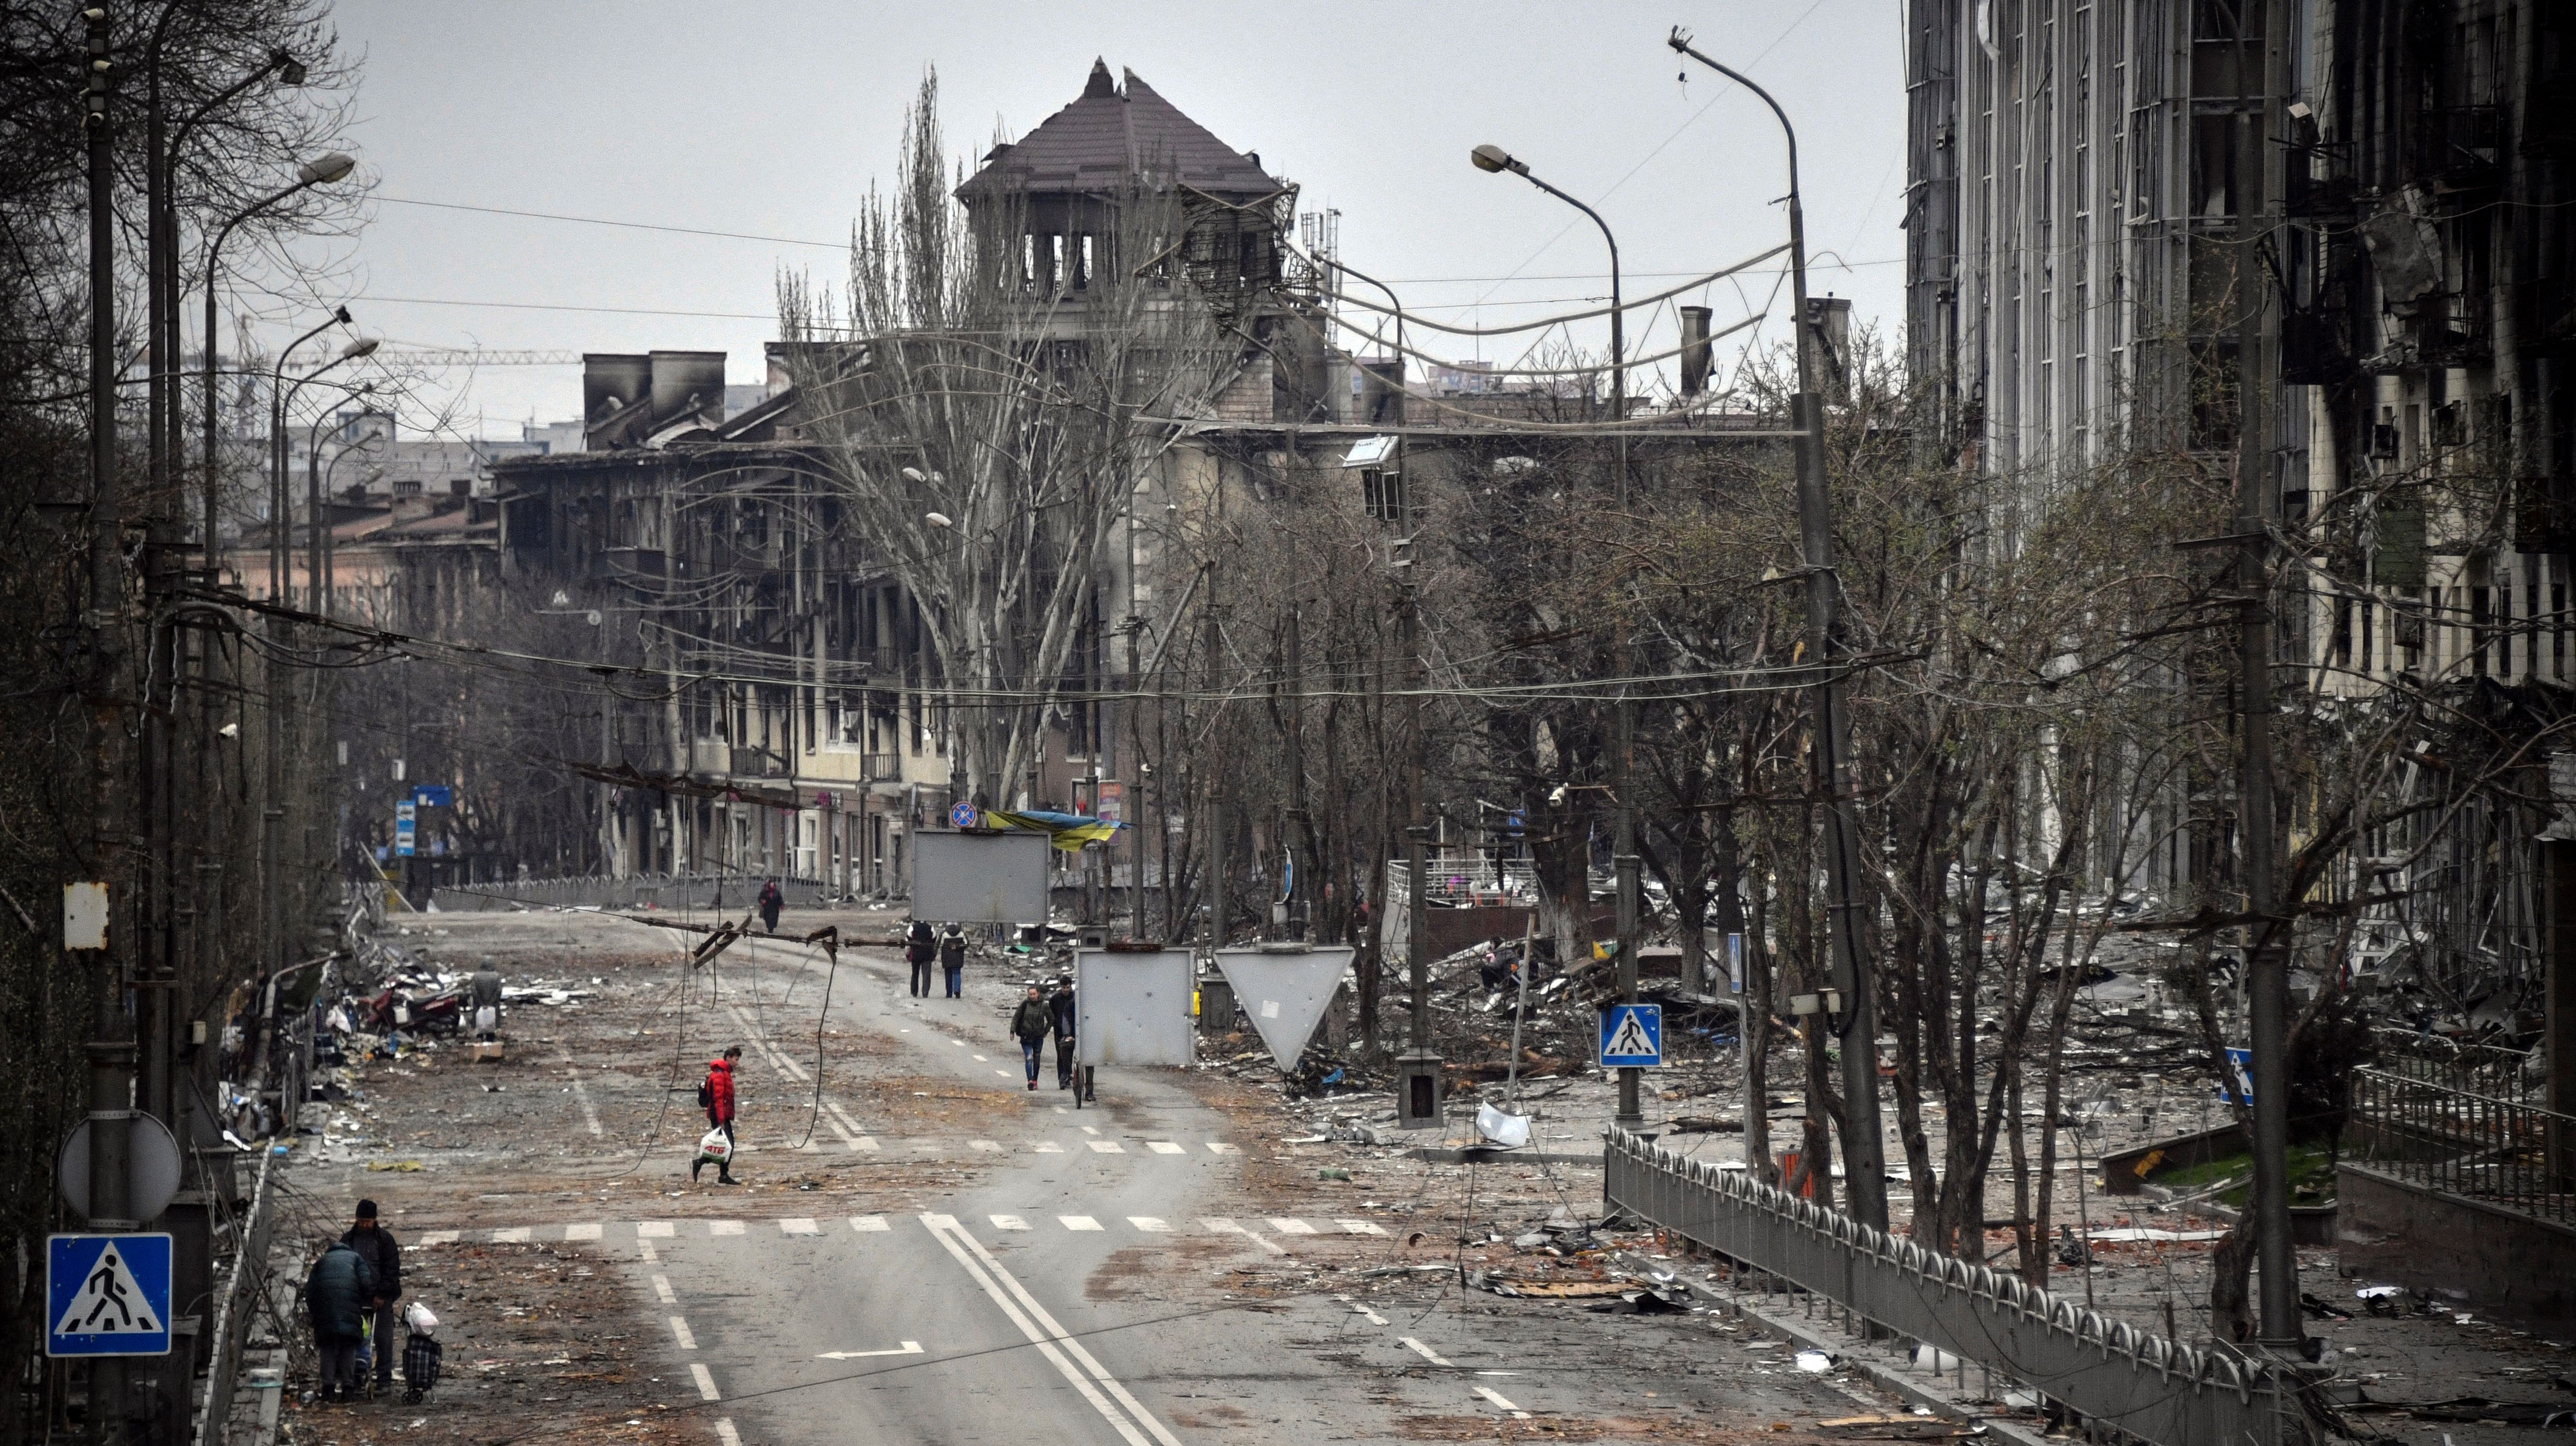 Editor's note: This photo was taken during a trip organized by the Russian military. It shows people walking down a street in Mariupol on April 12 near the site of a bombed-out theater.